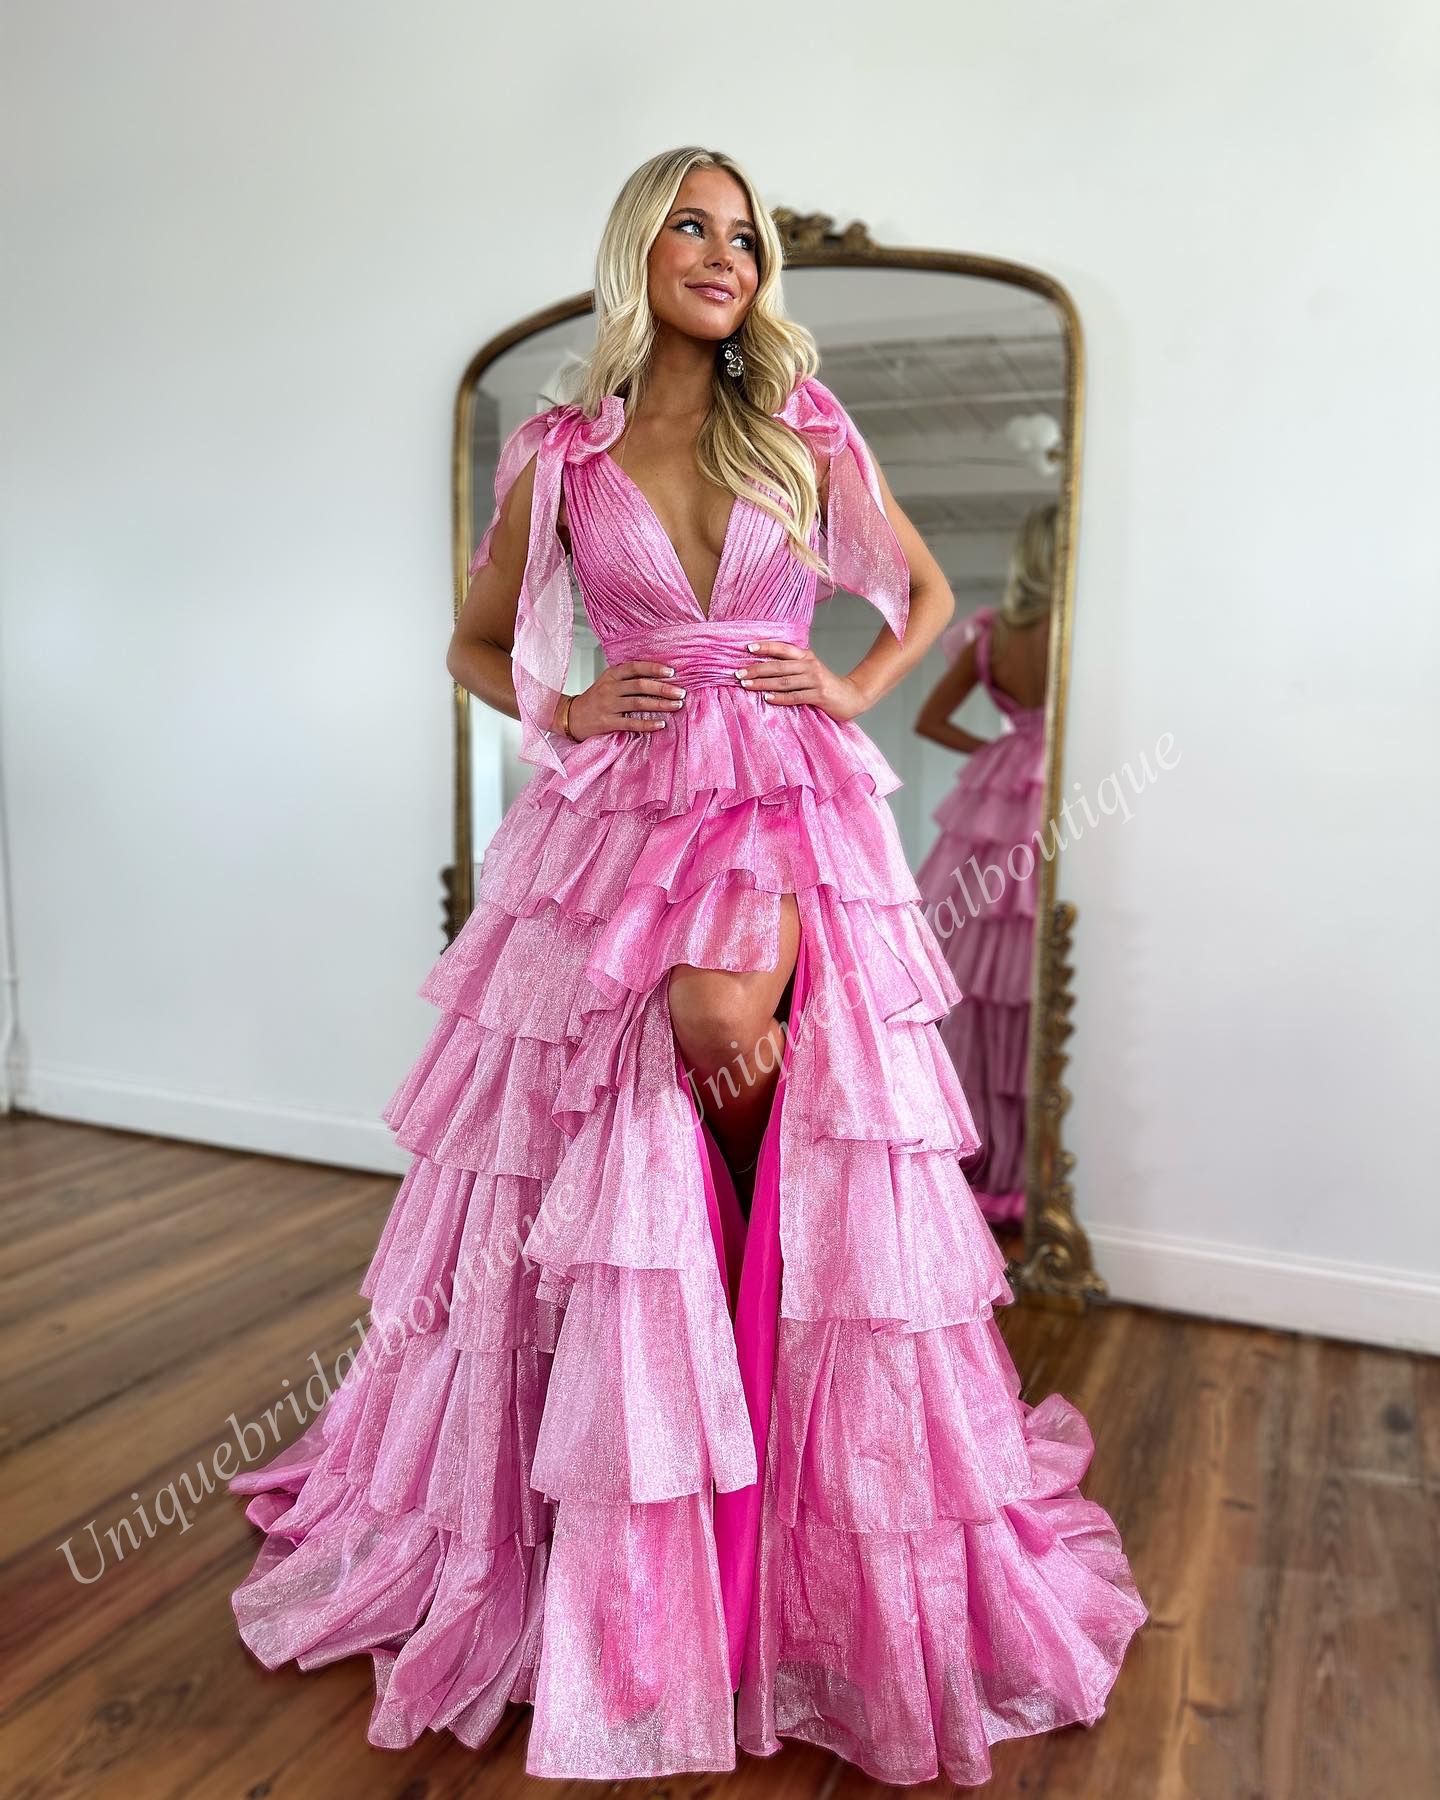 Fuchsia Prom Dress 2k24 Ruffle Pink Organza Plunging V-Neck Lady Preteen Pageant Gown Winter Formal Evening Cocktail Party Wedding Guest Red Capet Runway Gala Slit